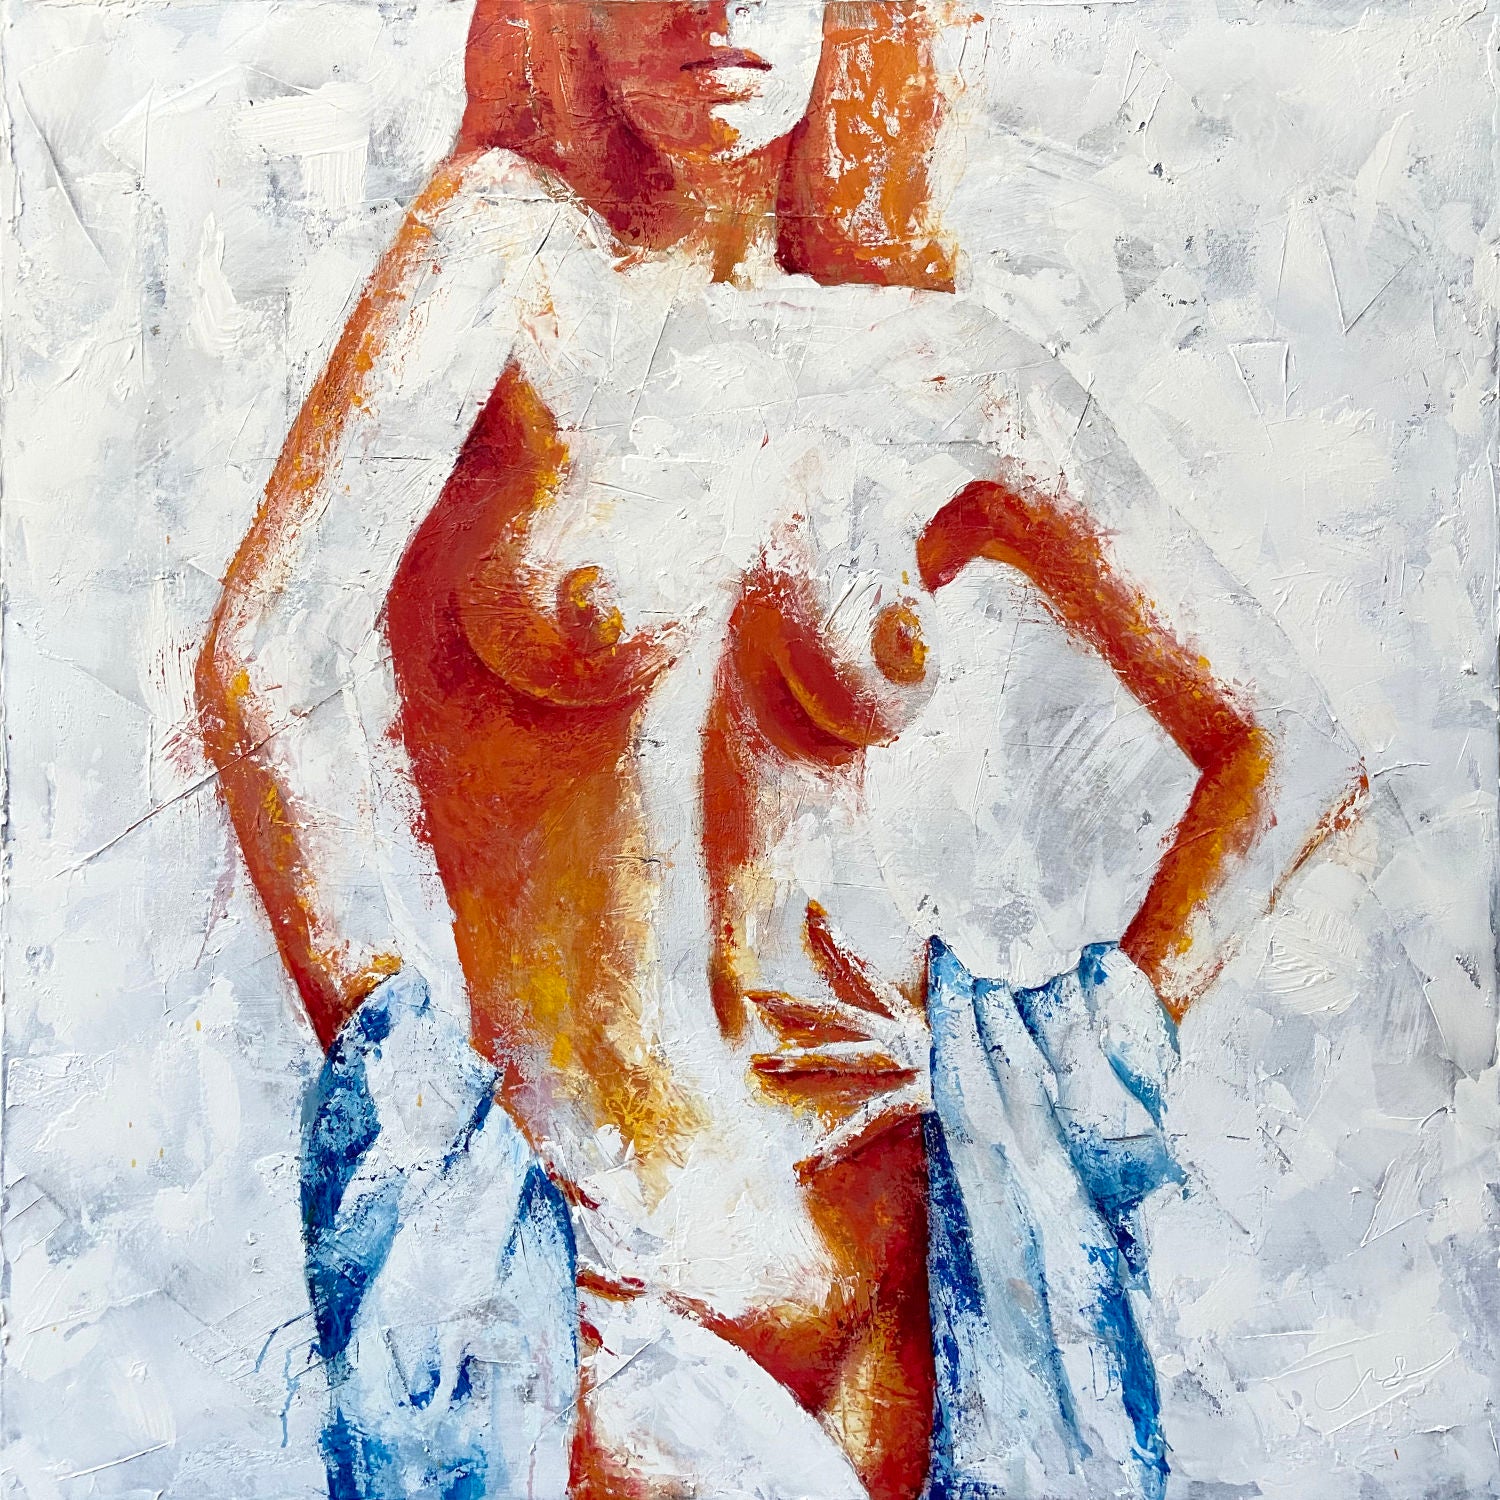 original oil painting and mixed media by cassidy austin studios. orange pop-art textured nude woman in power stance. Titled: I Am Power